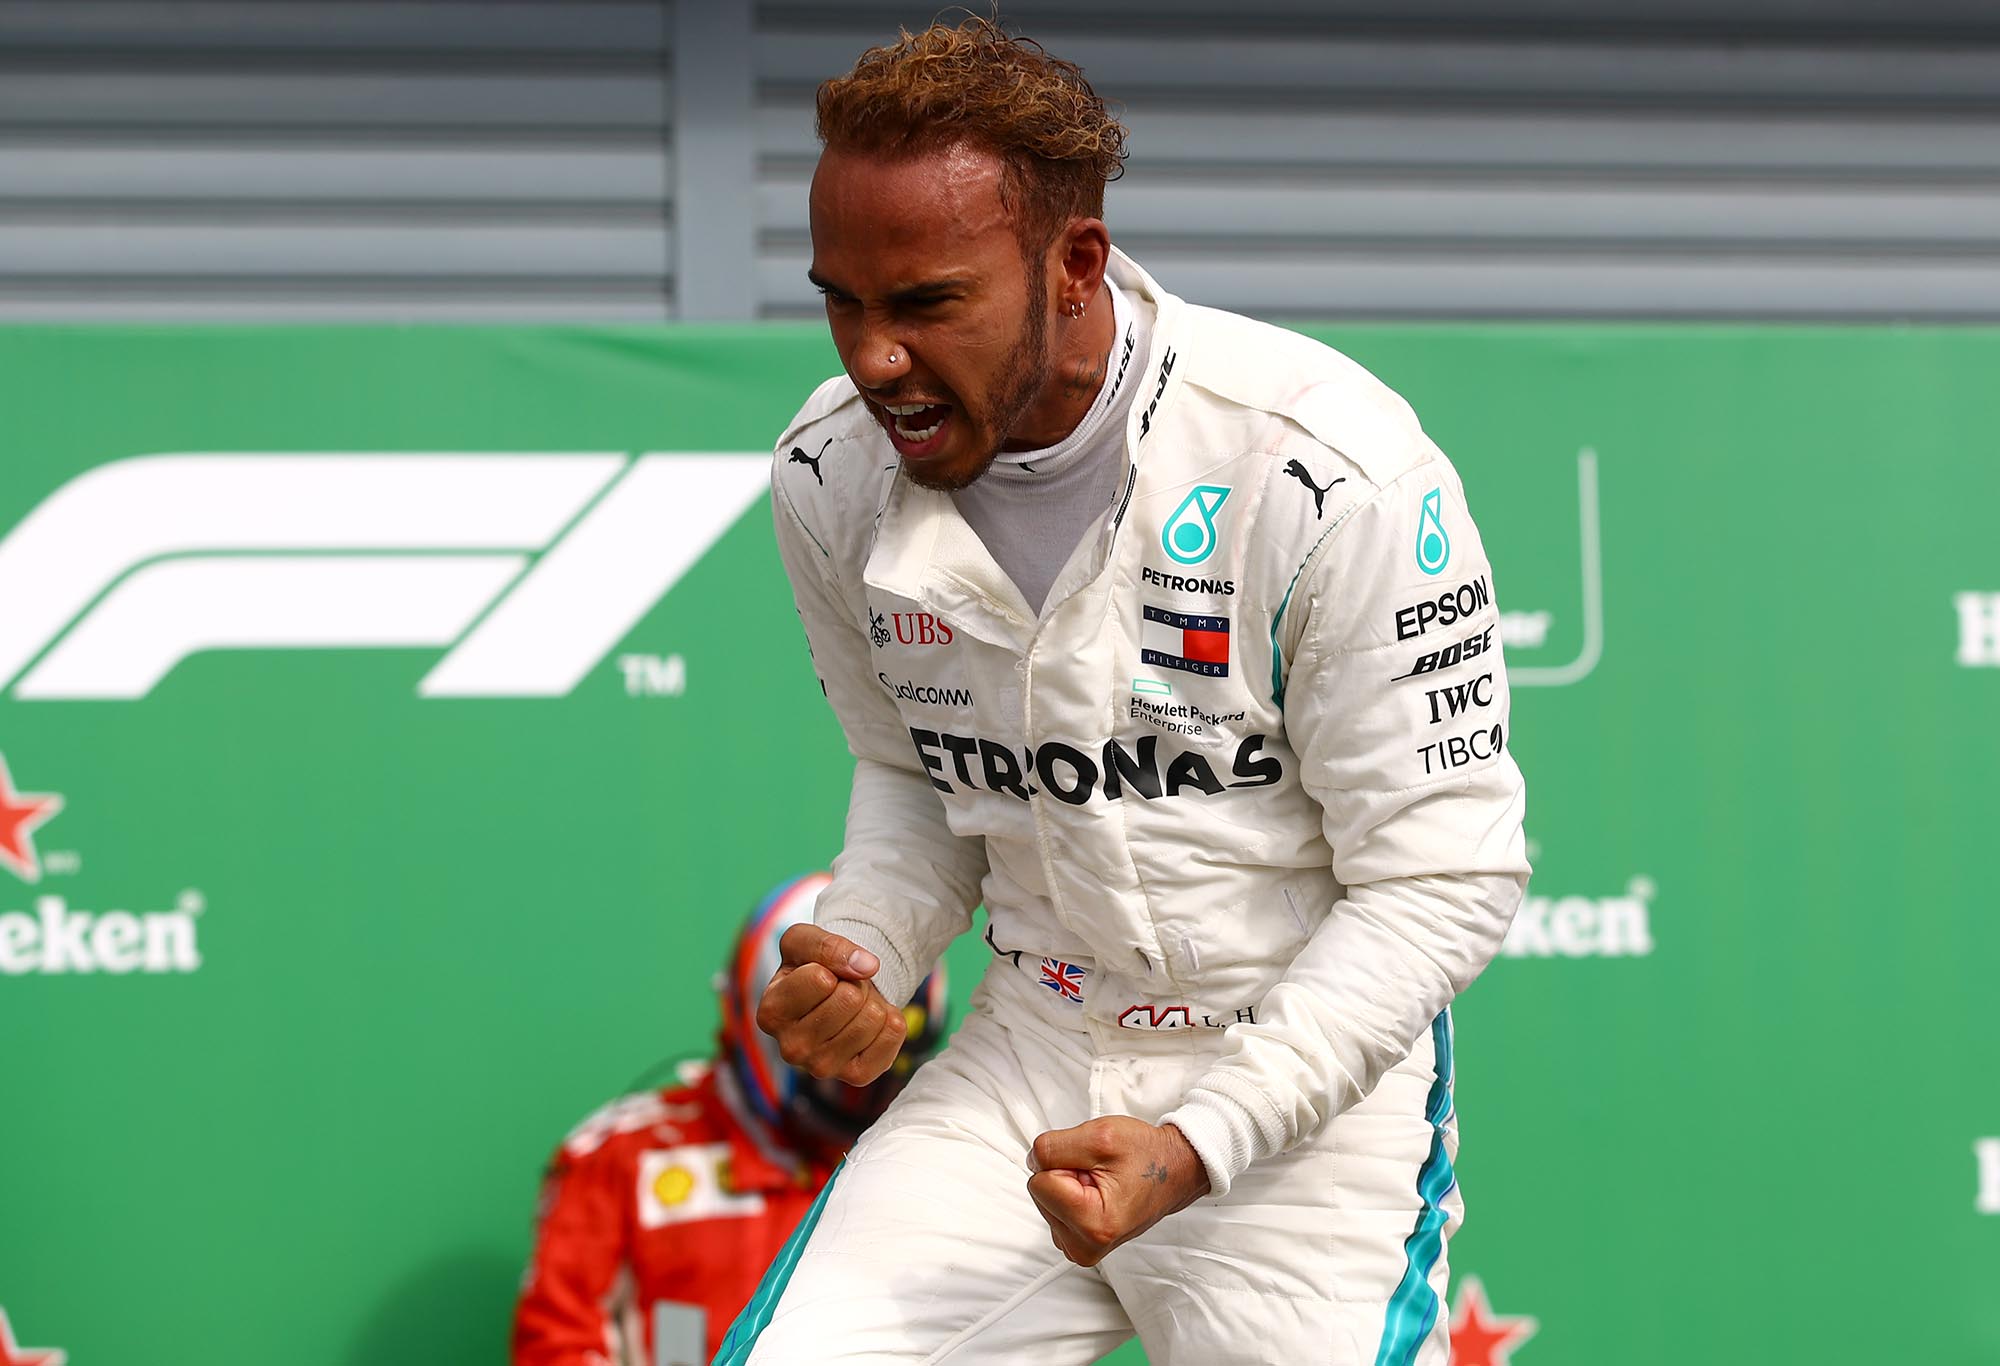 Lewis Hamilton stands atop his Mercedes after winning the Italian Grand Prix.